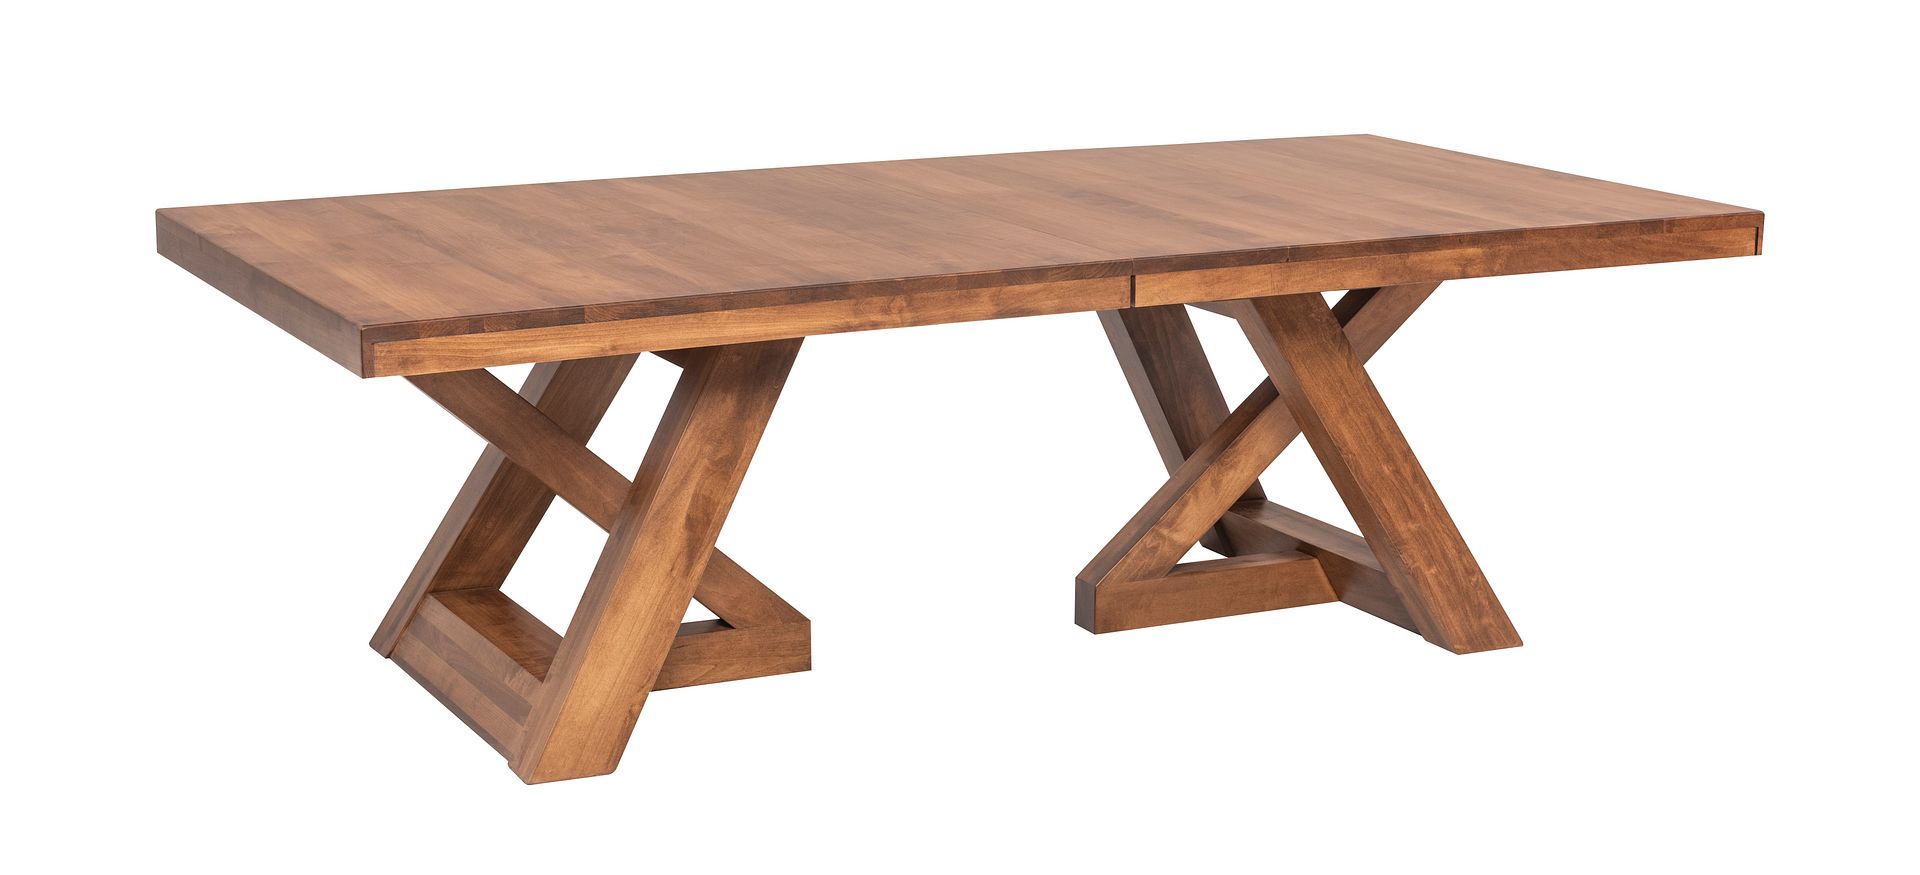 Featured Photo of Geneve Maple Solid Wood Pedestal Dining Tables